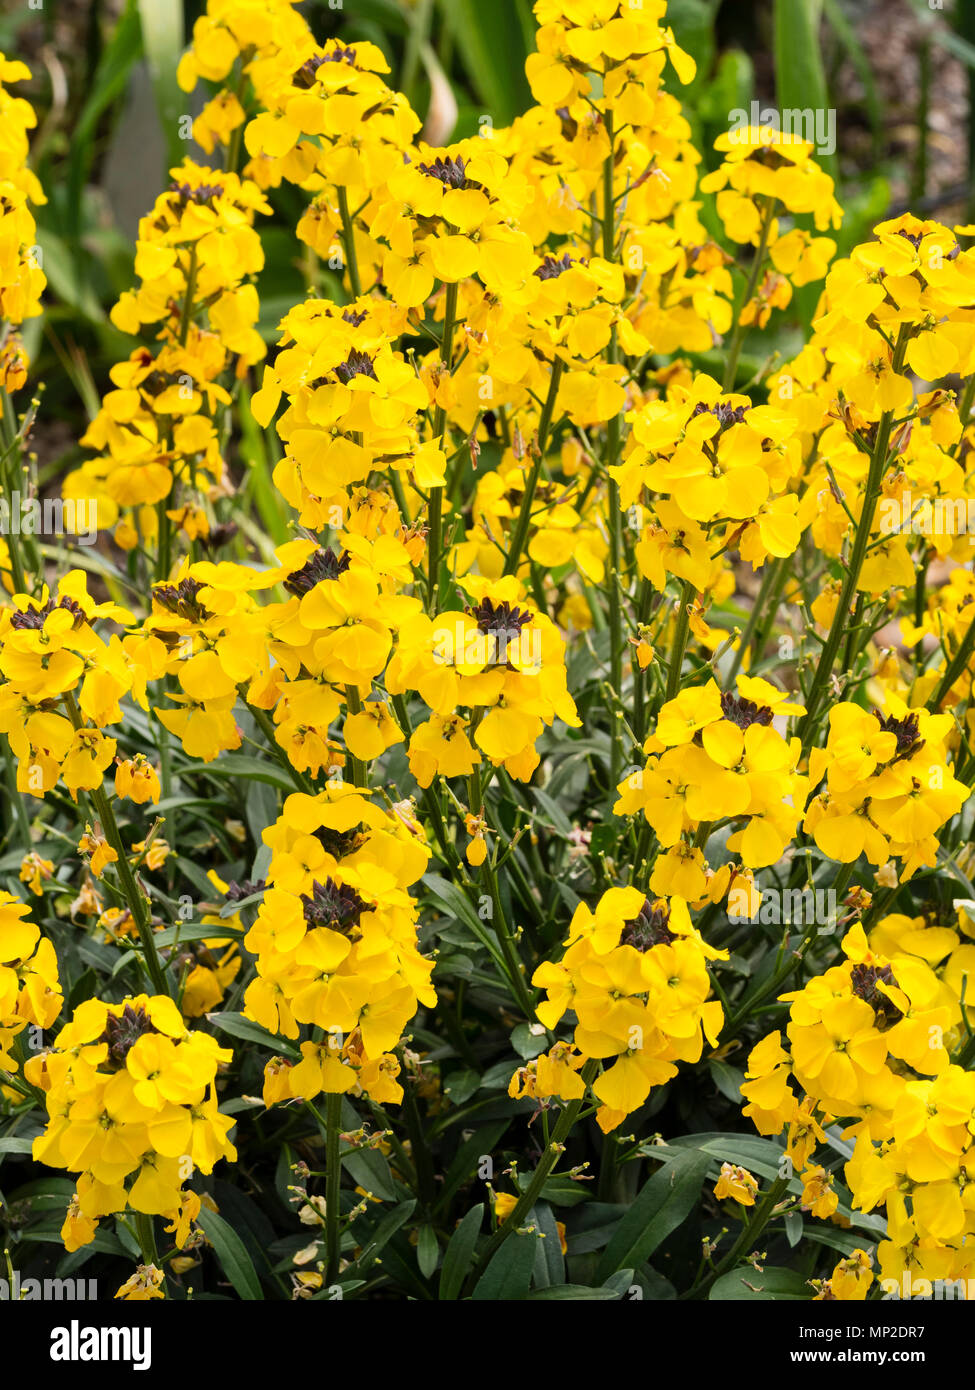 Fragrant yellow flowers of the short lived, long flowering, shrubby perennial Erysimum 'Bowle's Yellow' Stock Photo